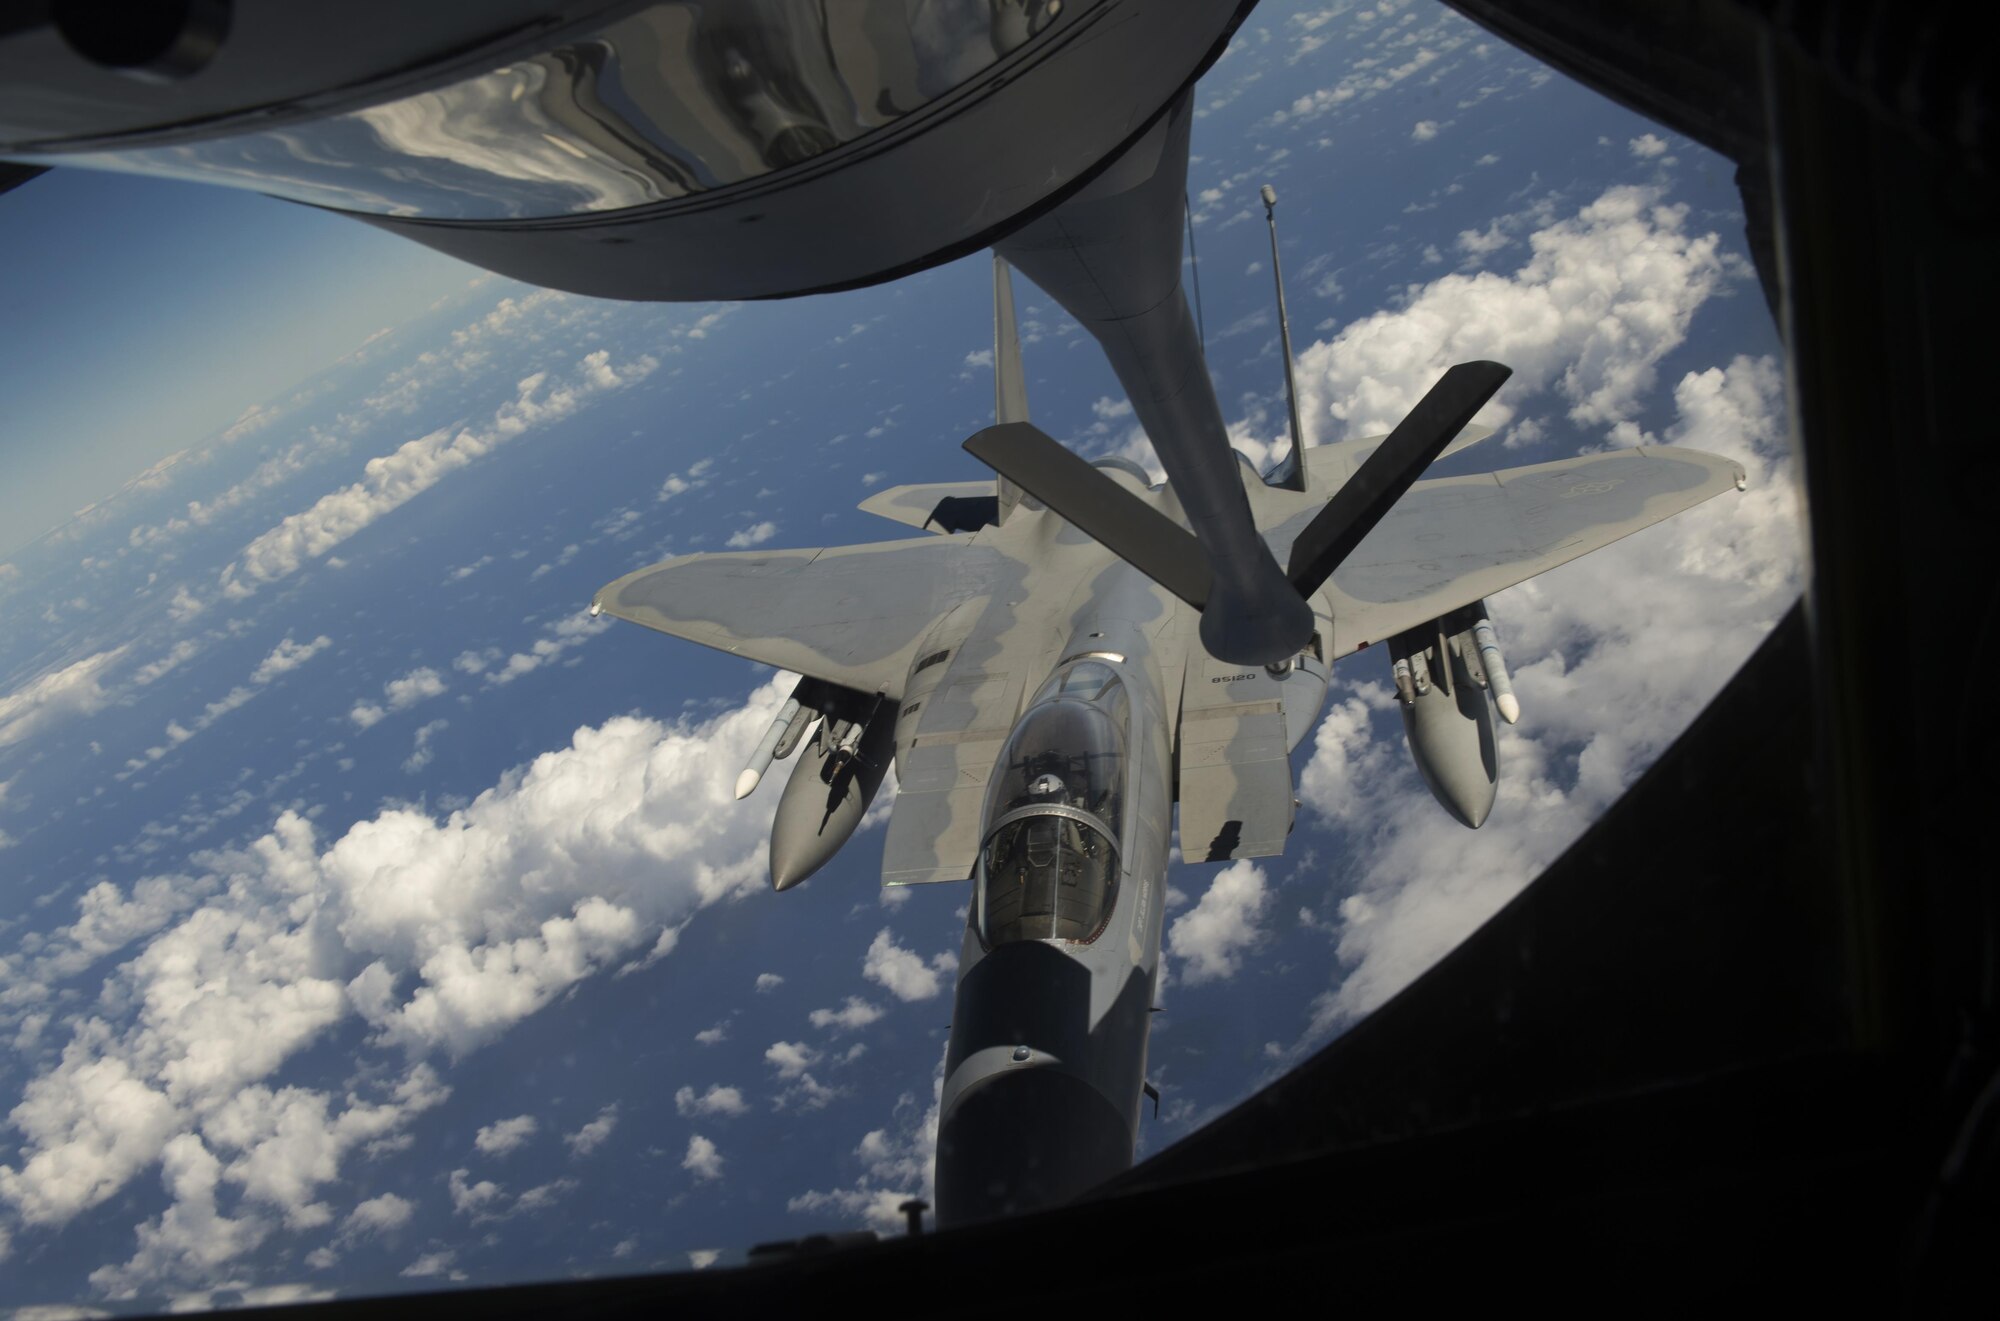 A 44th Fighter Squadron F-15 Eagle connects to a 909th Air Refueling Squadron KC-135 Stratotanker for aerial refueling during the large force employment of exercise Cope North 16, Feb. 24, 2016, at Andersen Air Force Base, Guam. Through training exercises such as CN16, the U.S., Japan and Australian air forces develop combat capabilities, enhancing air superiority, electronic warfare, air interdiction, tactical airlift and aerial refueling. (U.S. Air Force photo by Staff Sgt. Matthew B. Fredericks/Released)